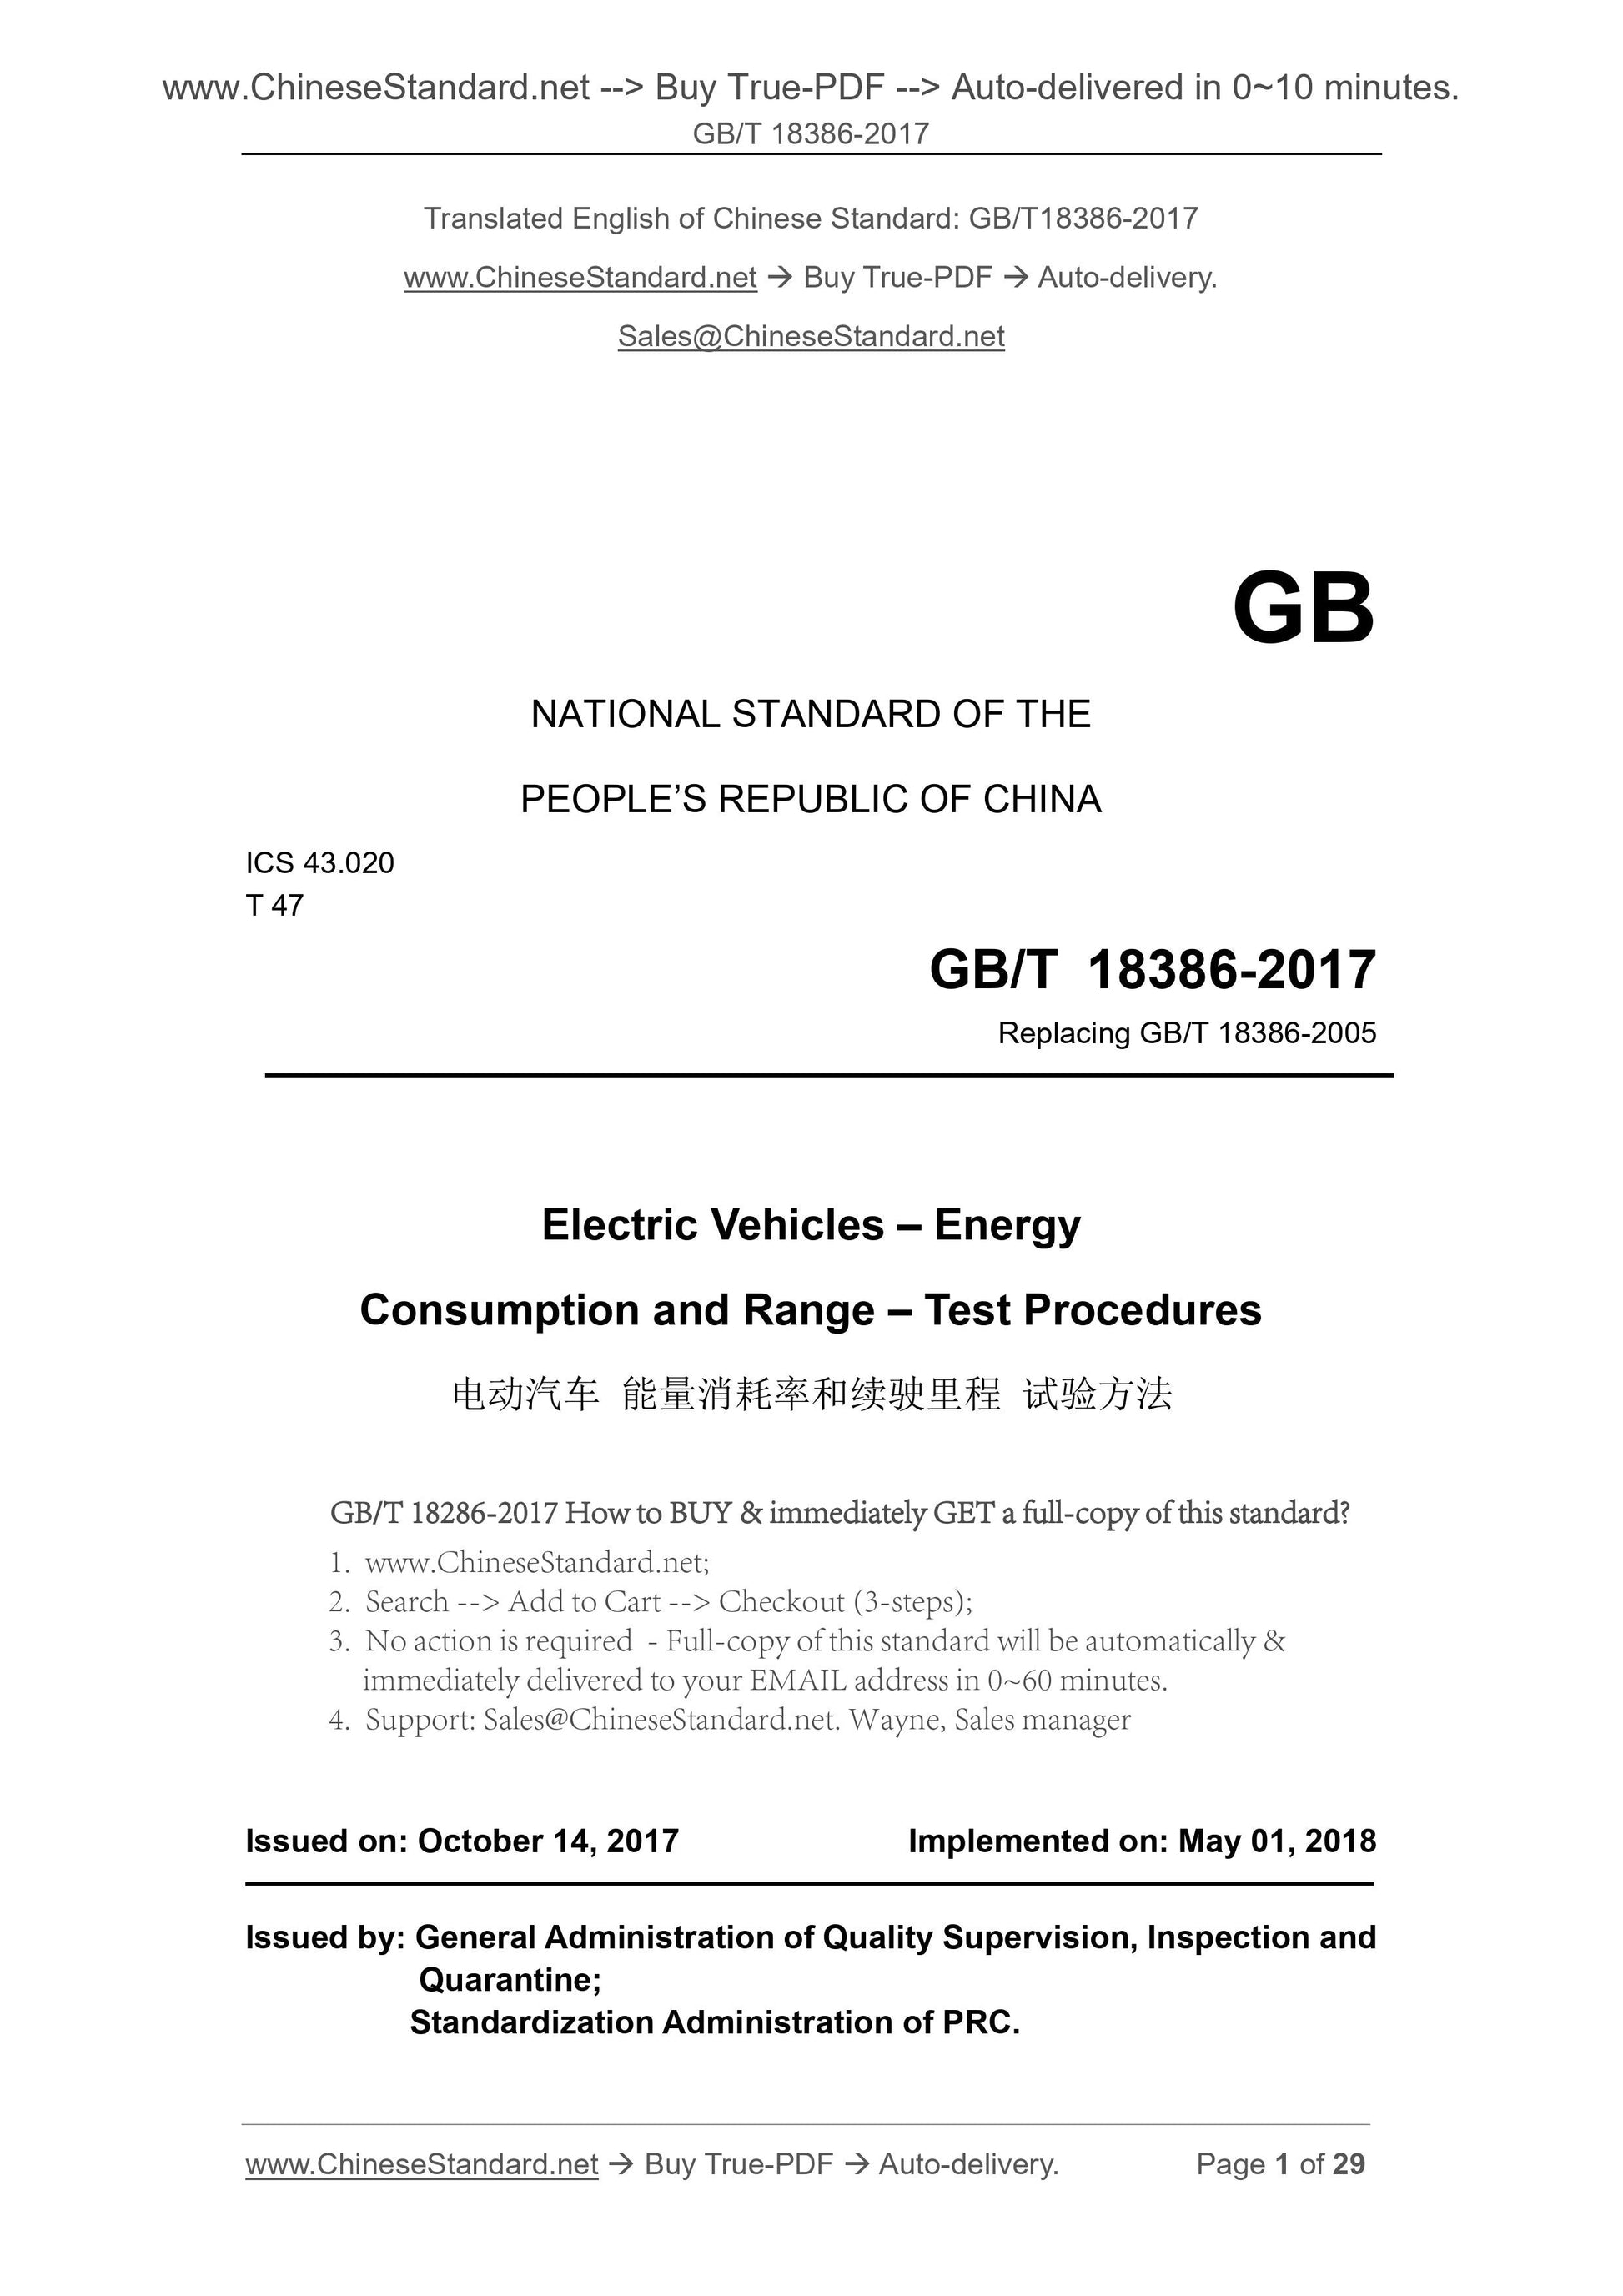 GB/T 18386-2017 Page 1